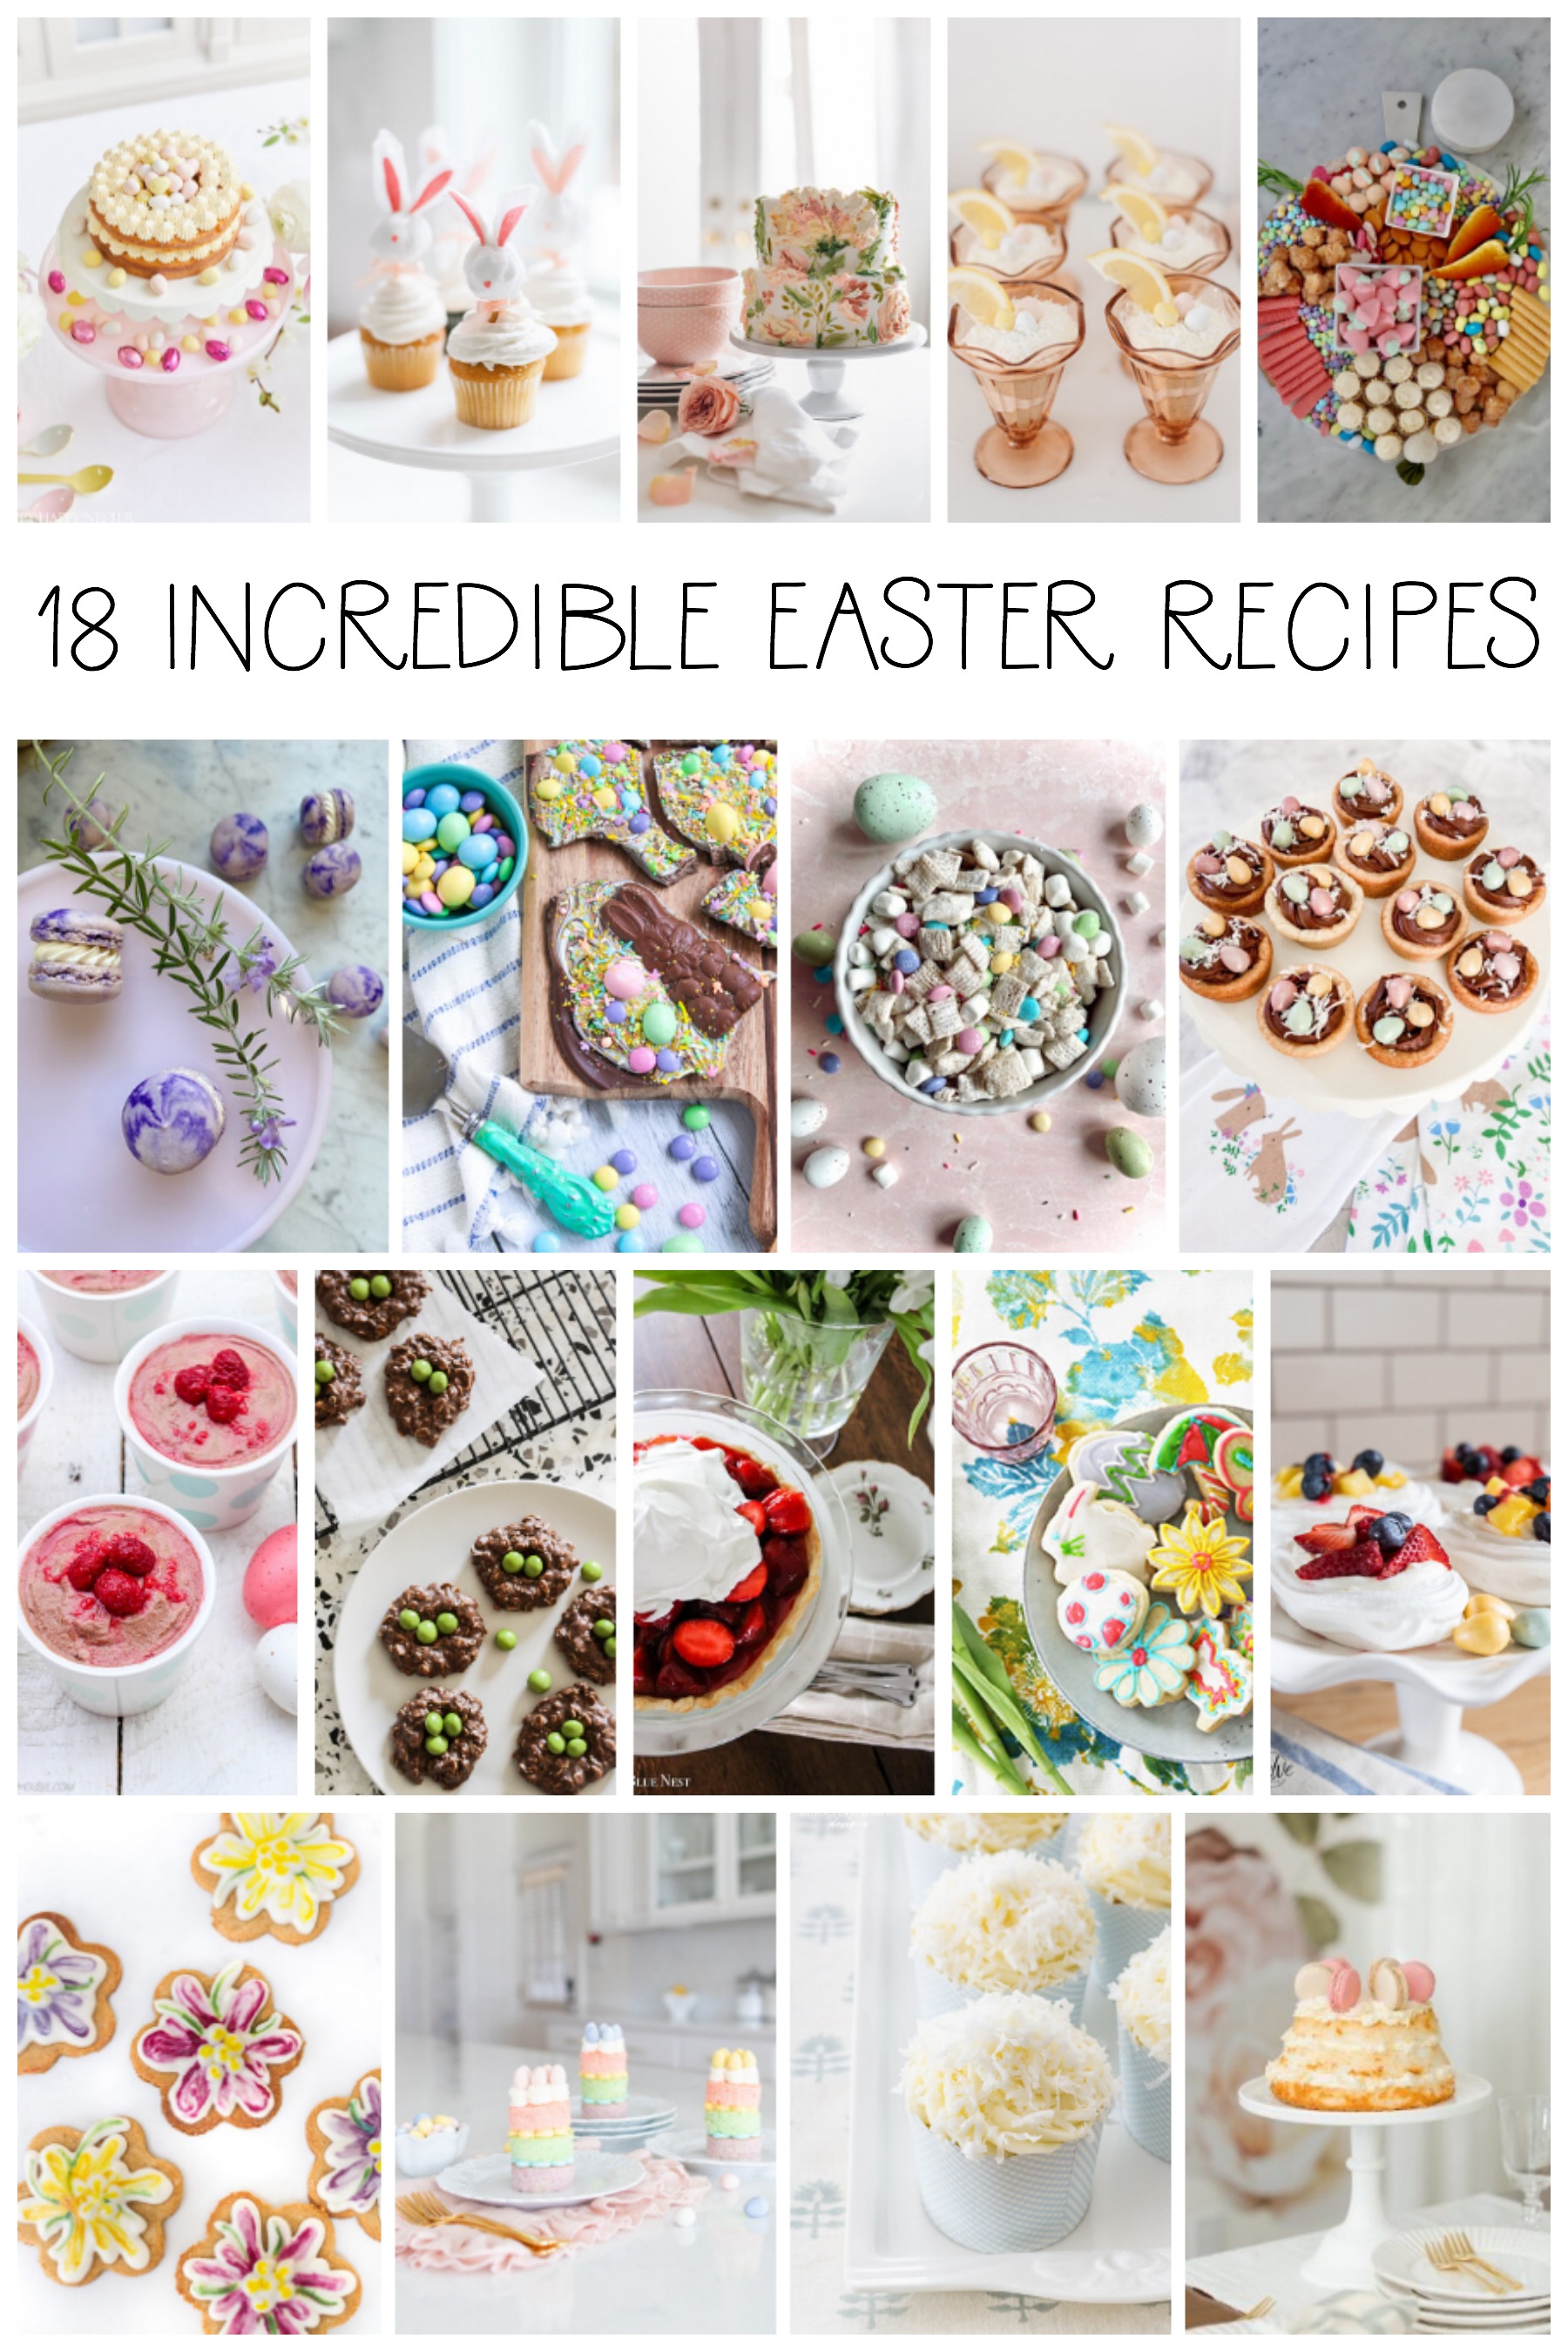 18 Incredible Easter Recipes graphic.